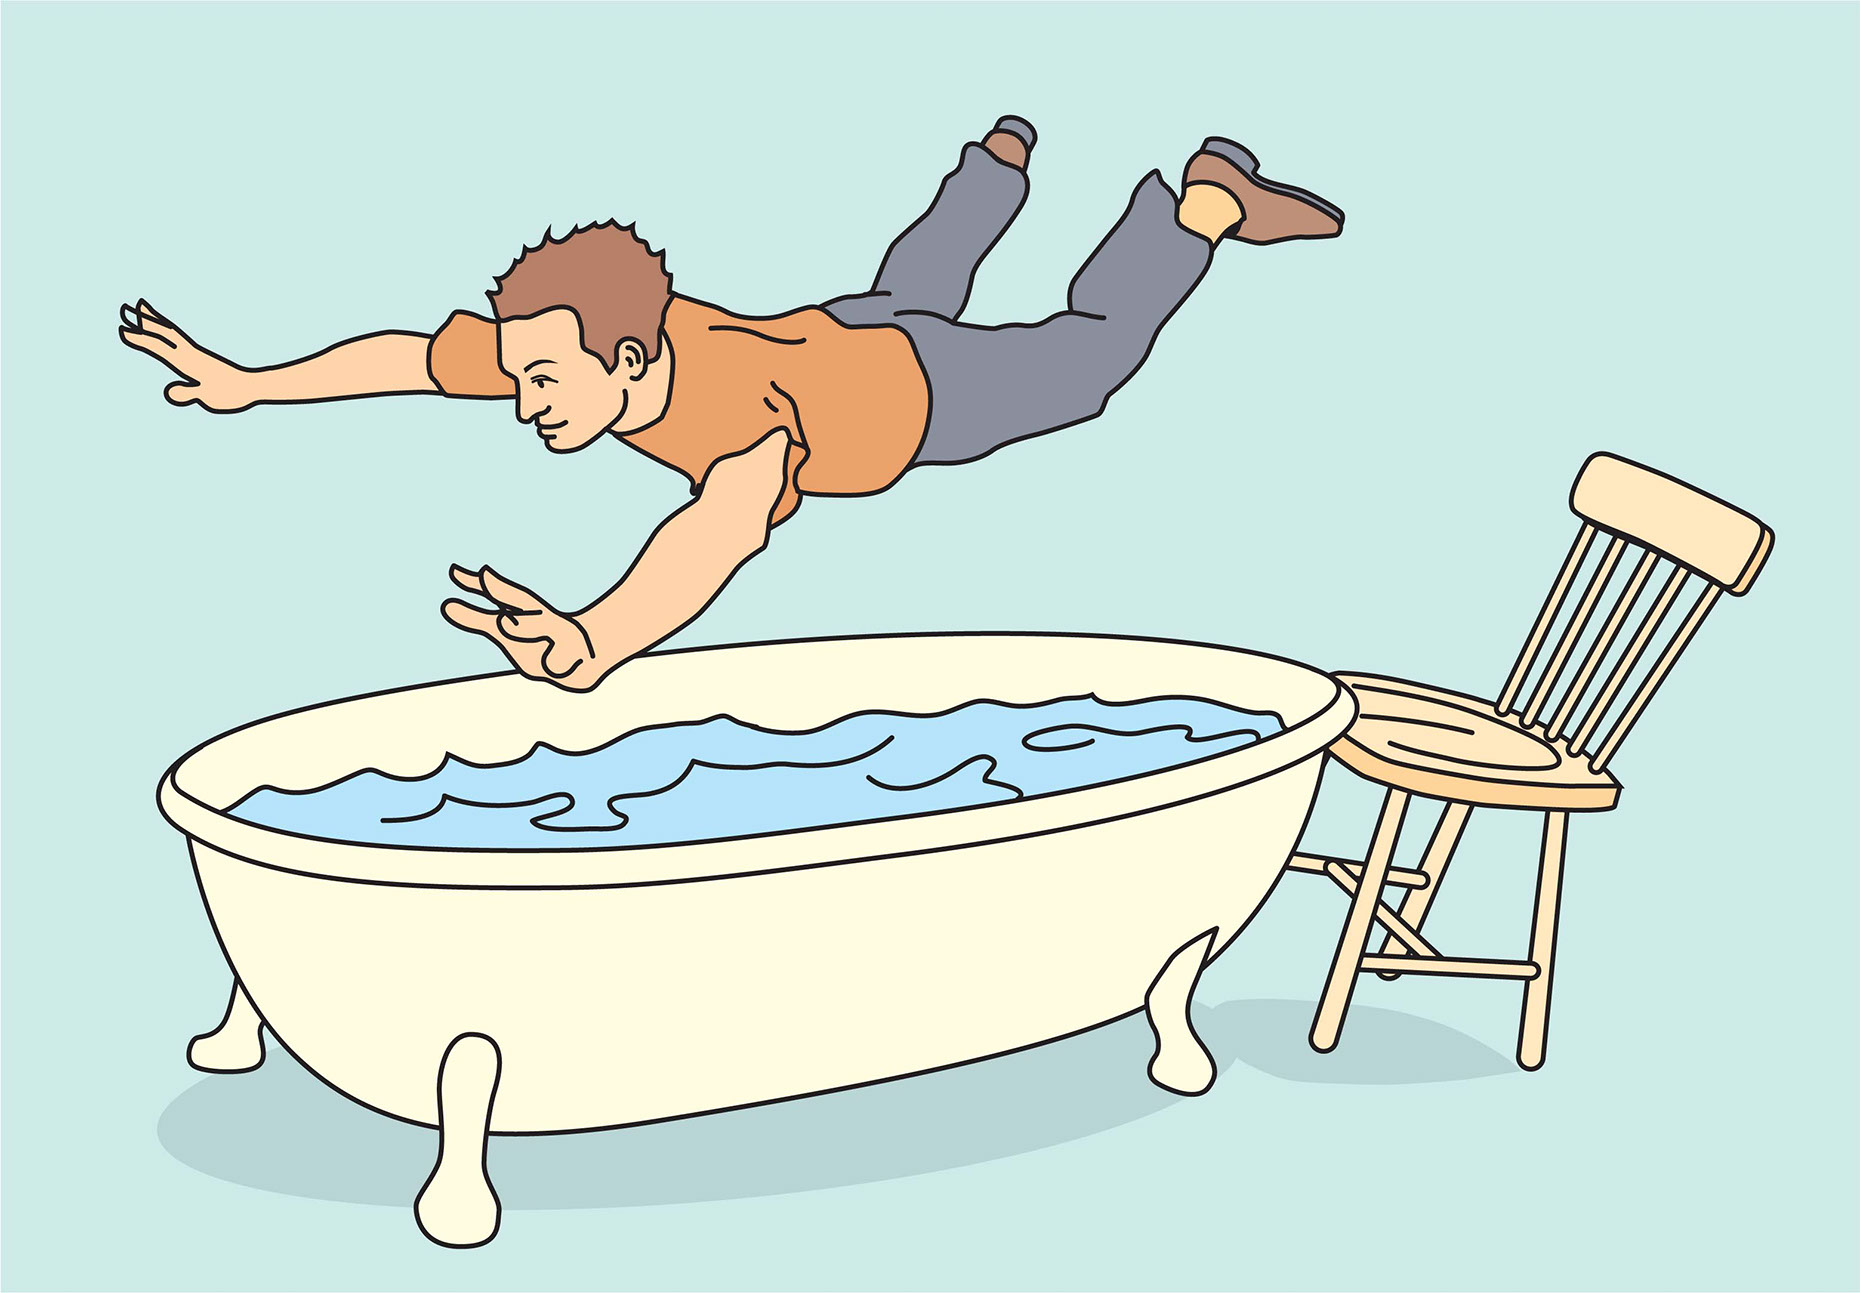 illustration-Technical and How To_Loaded Bath Dive-Jon Rogers